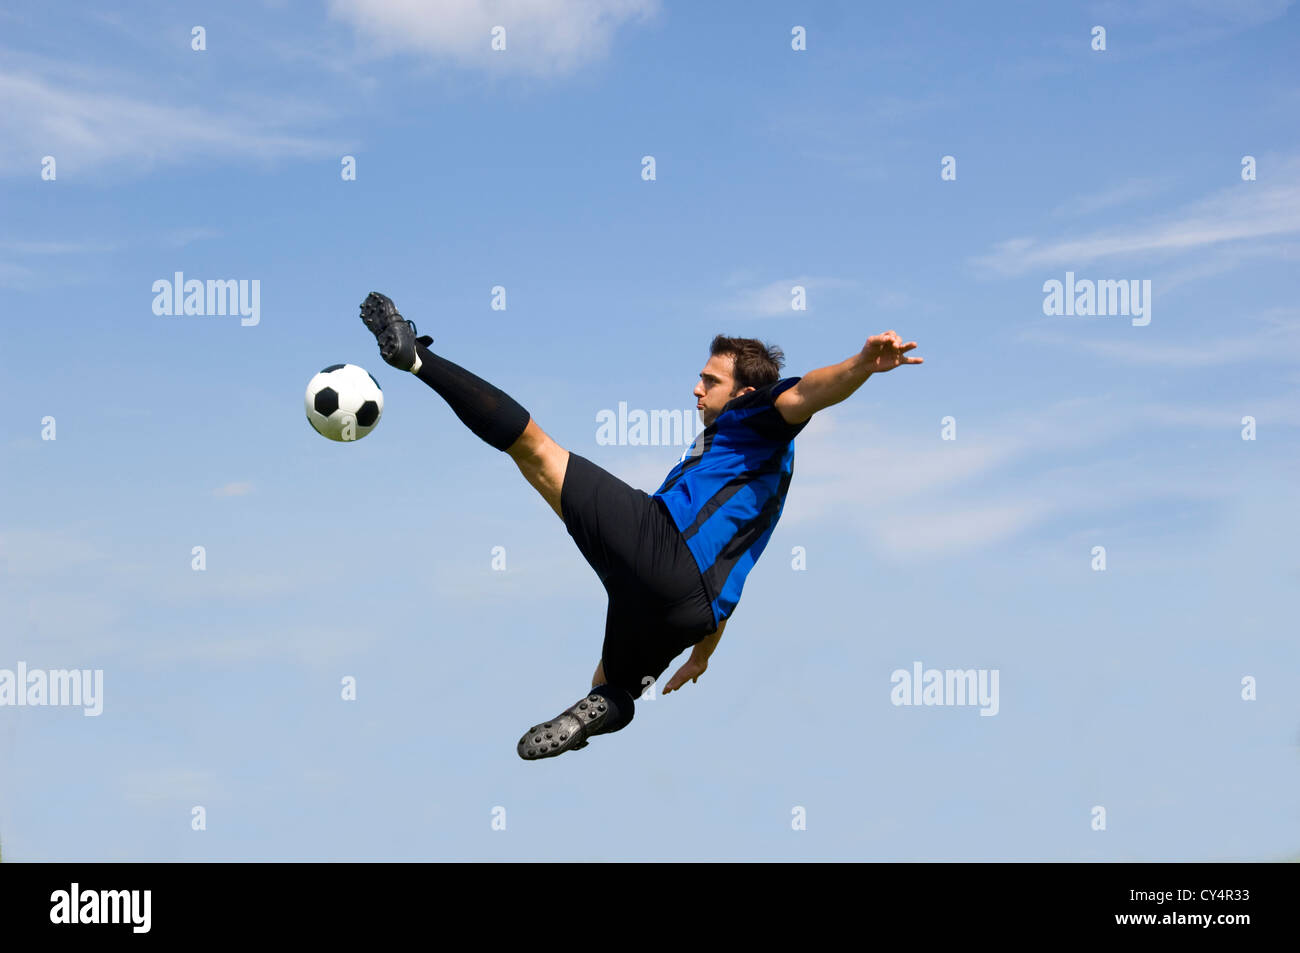 Football - soccer player against blue sky making volley Stock Photo